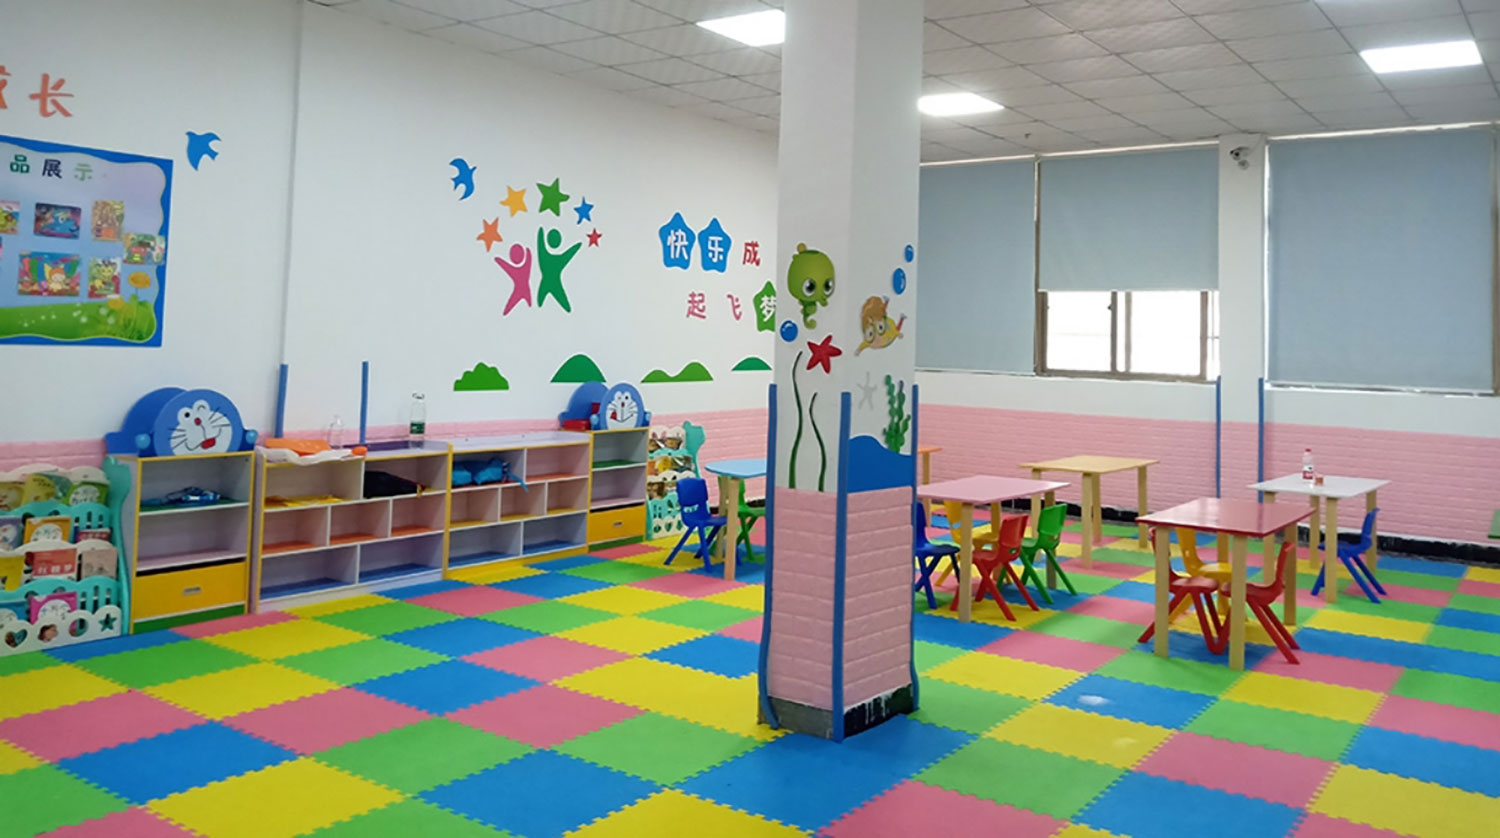 A Day in the Life of a Child Friendly Space in Zhejiang, China